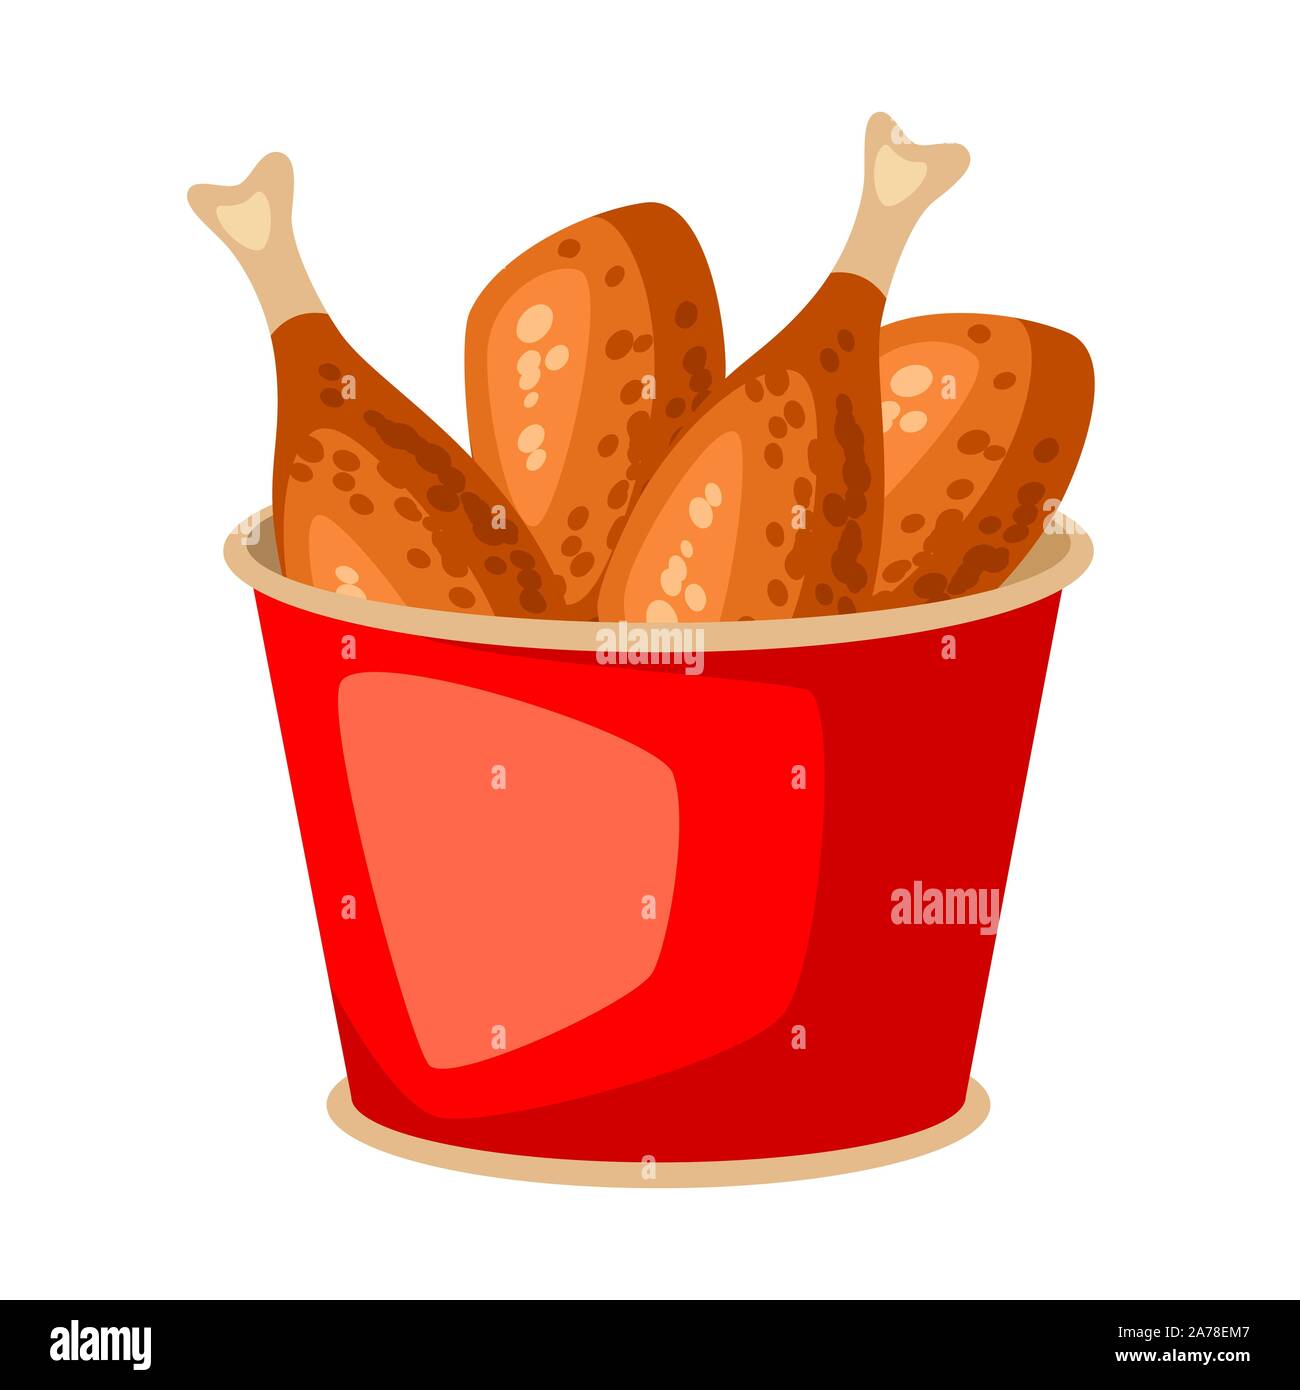 Fried chicken in red bucket. Fast food snack. Stock Vector